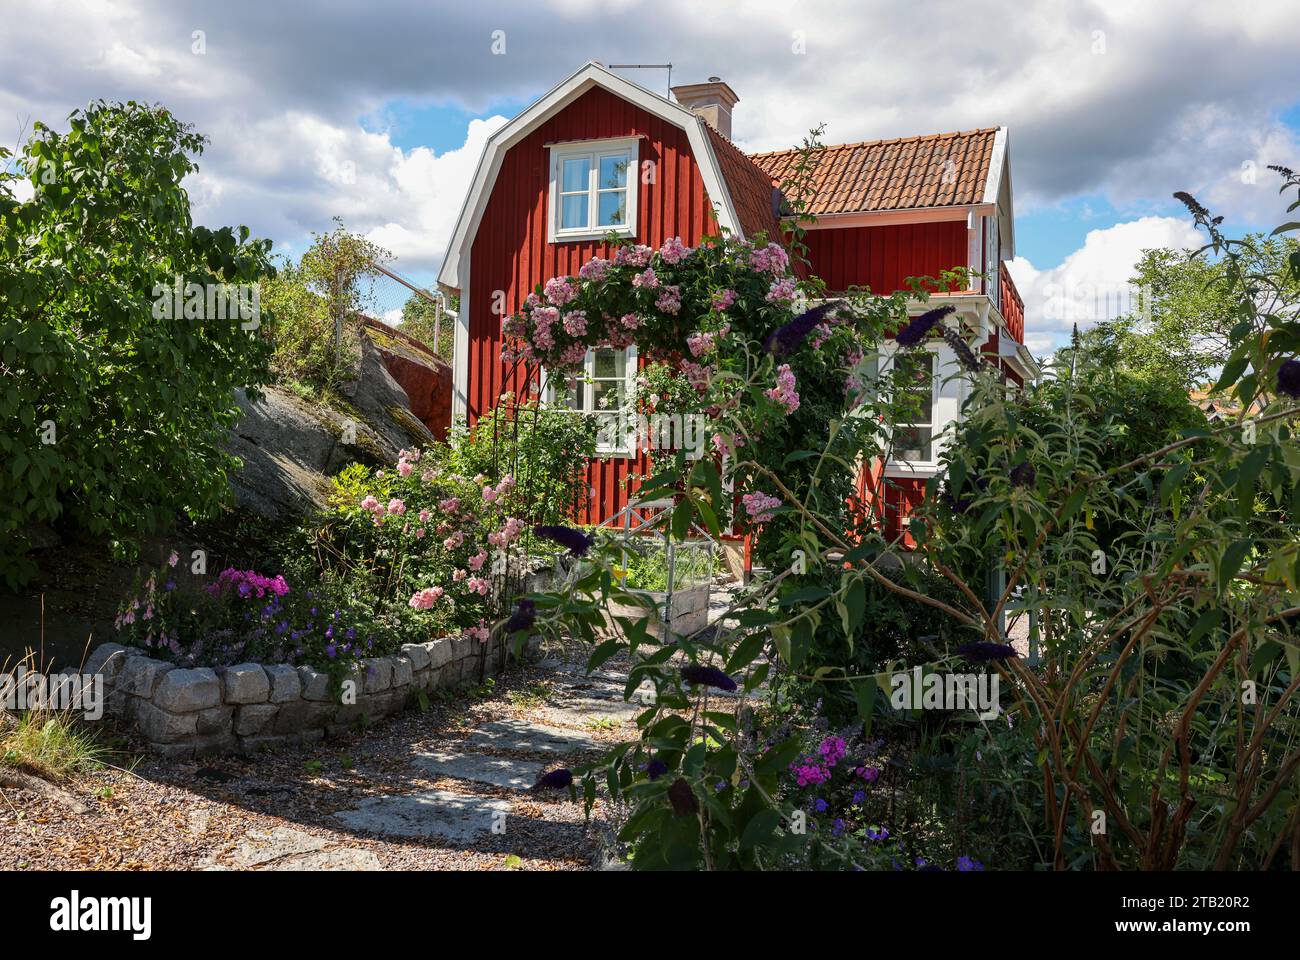 Traditional wooden Swedish houses on the island of Vaxholmen in the Stockholm archipelago. Sweden Stock Photo